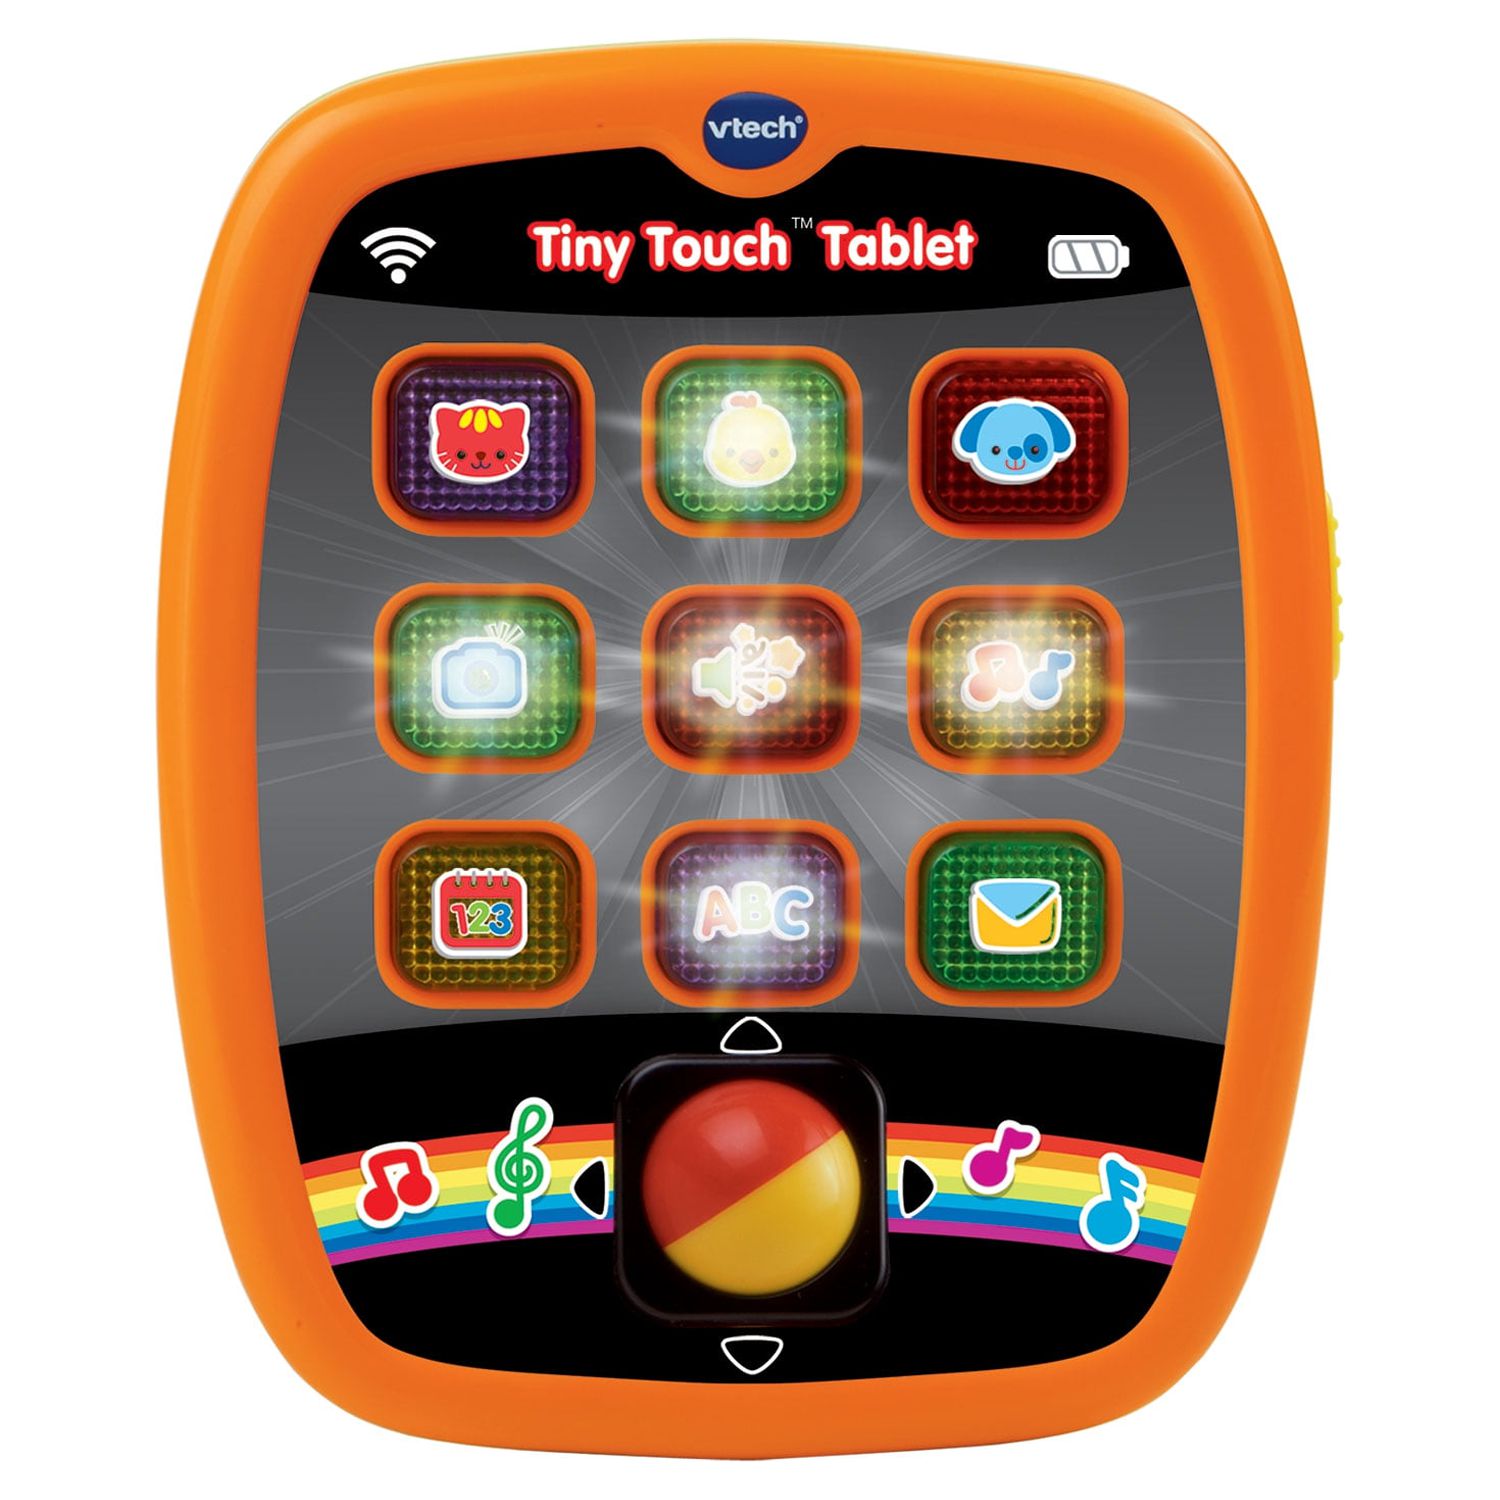 VTech Tiny Touch Tablet, Learning Toy for Baby, Teaches Letters, Numbers, Walmart Exclusive - image 1 of 5